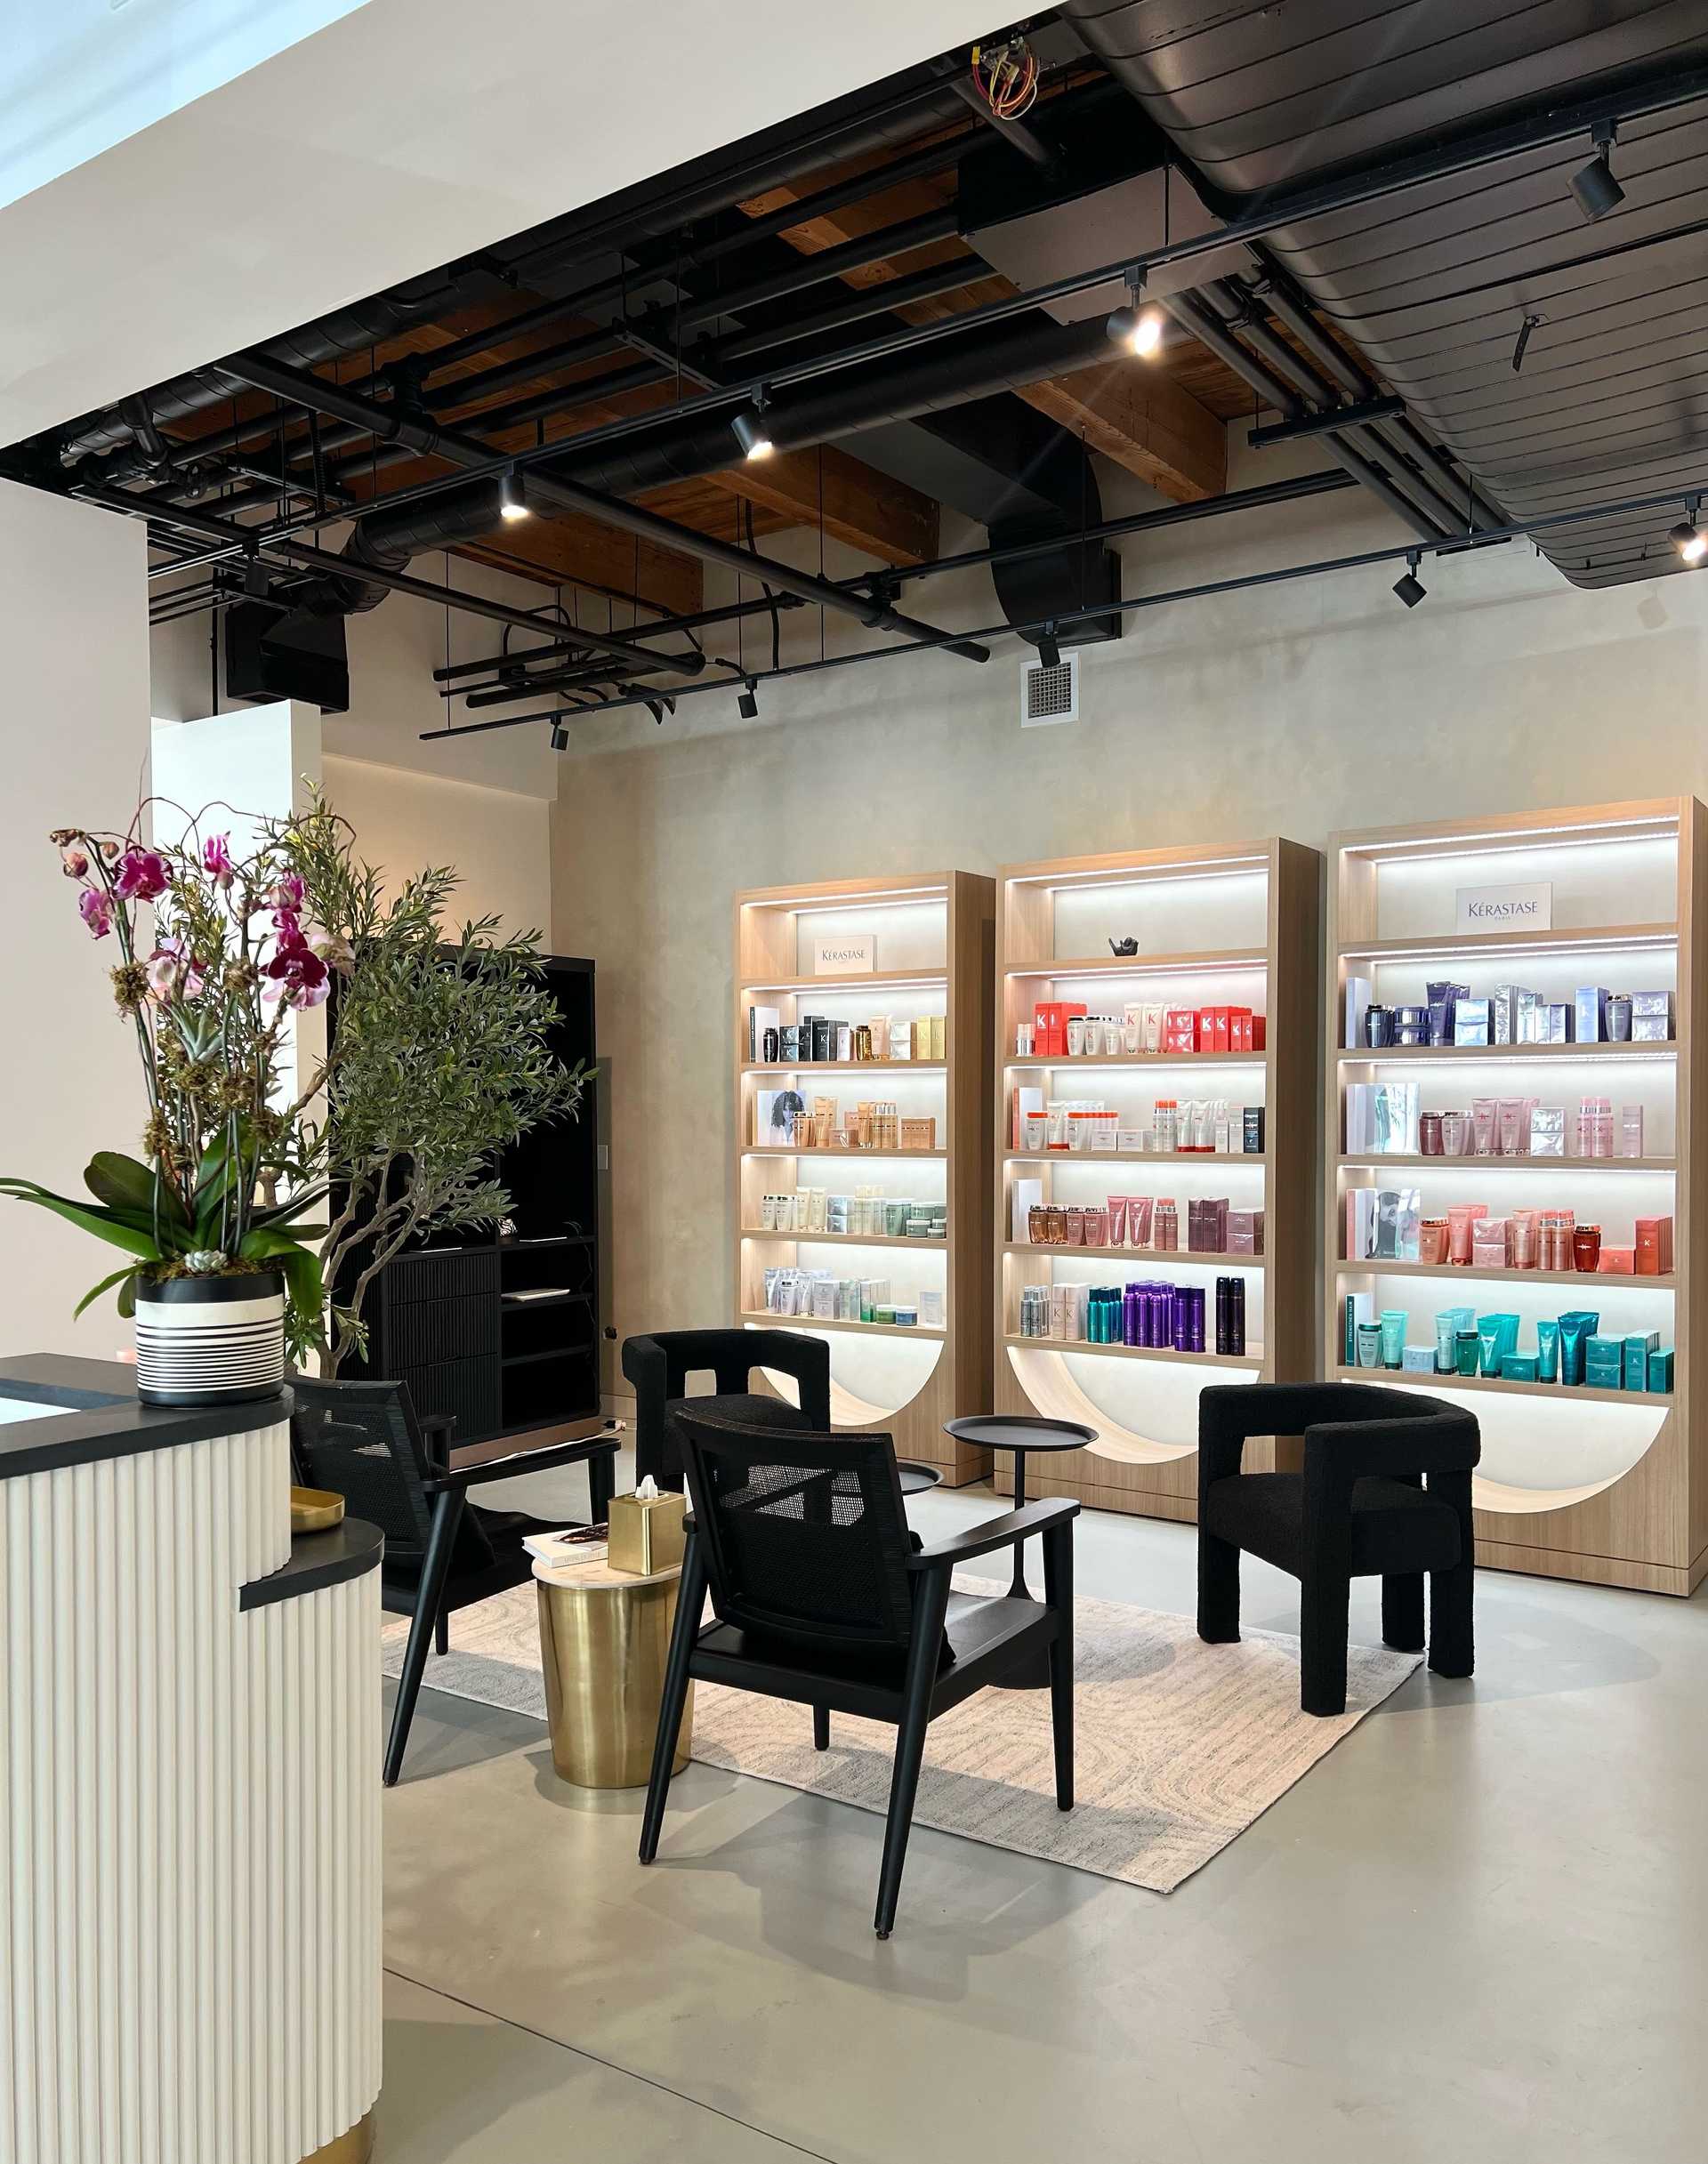 Modern beauty salon interior with product shelves and seating area.